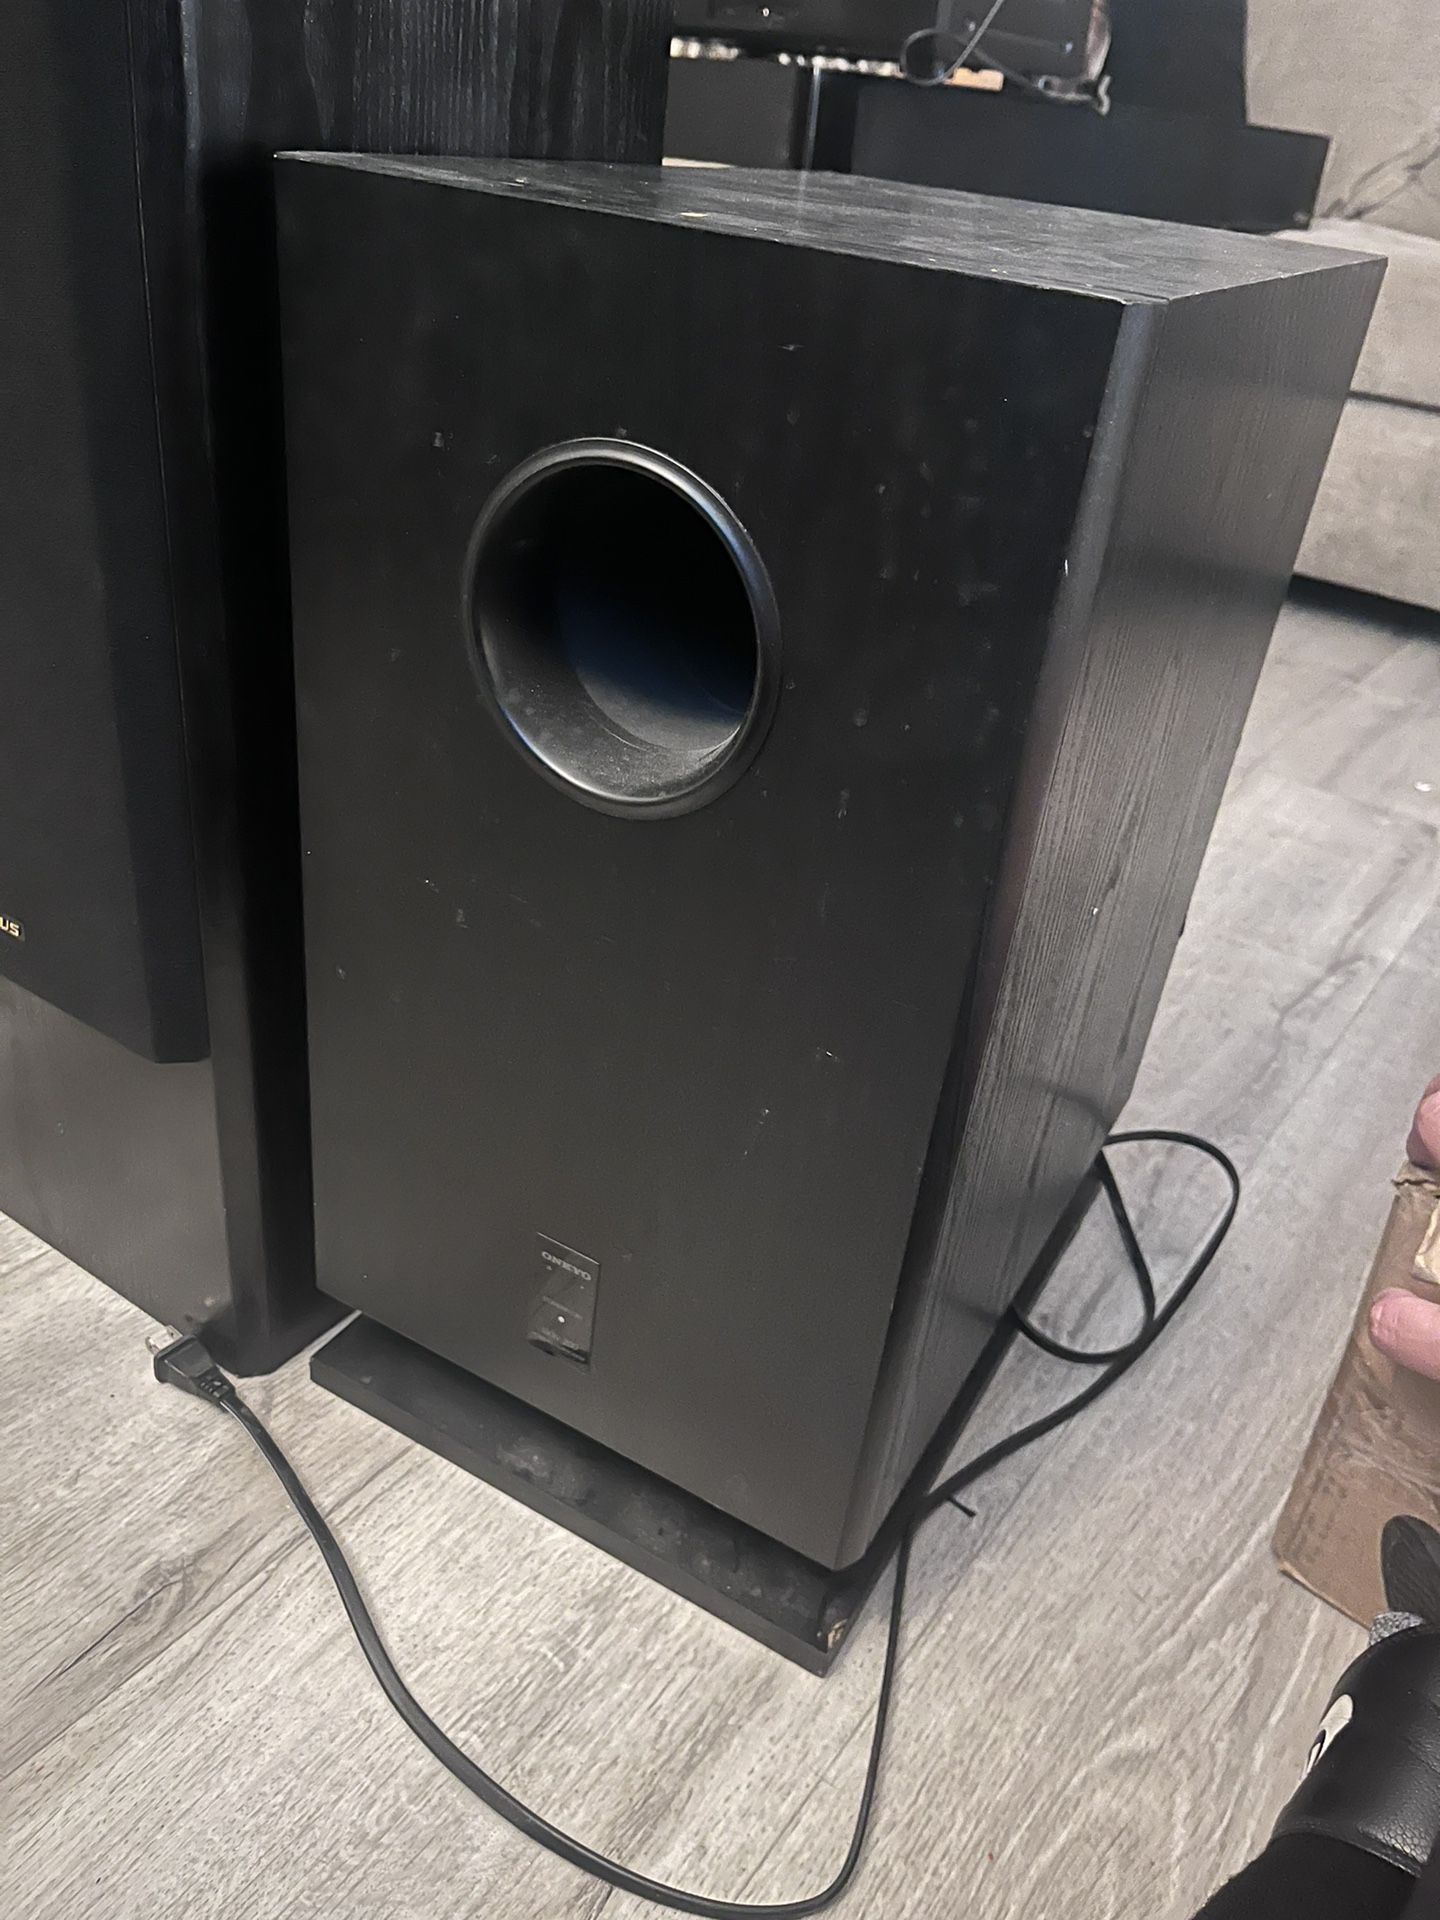 Onkyo SKW-200 Subwoofer And Optimus Tower Speakers